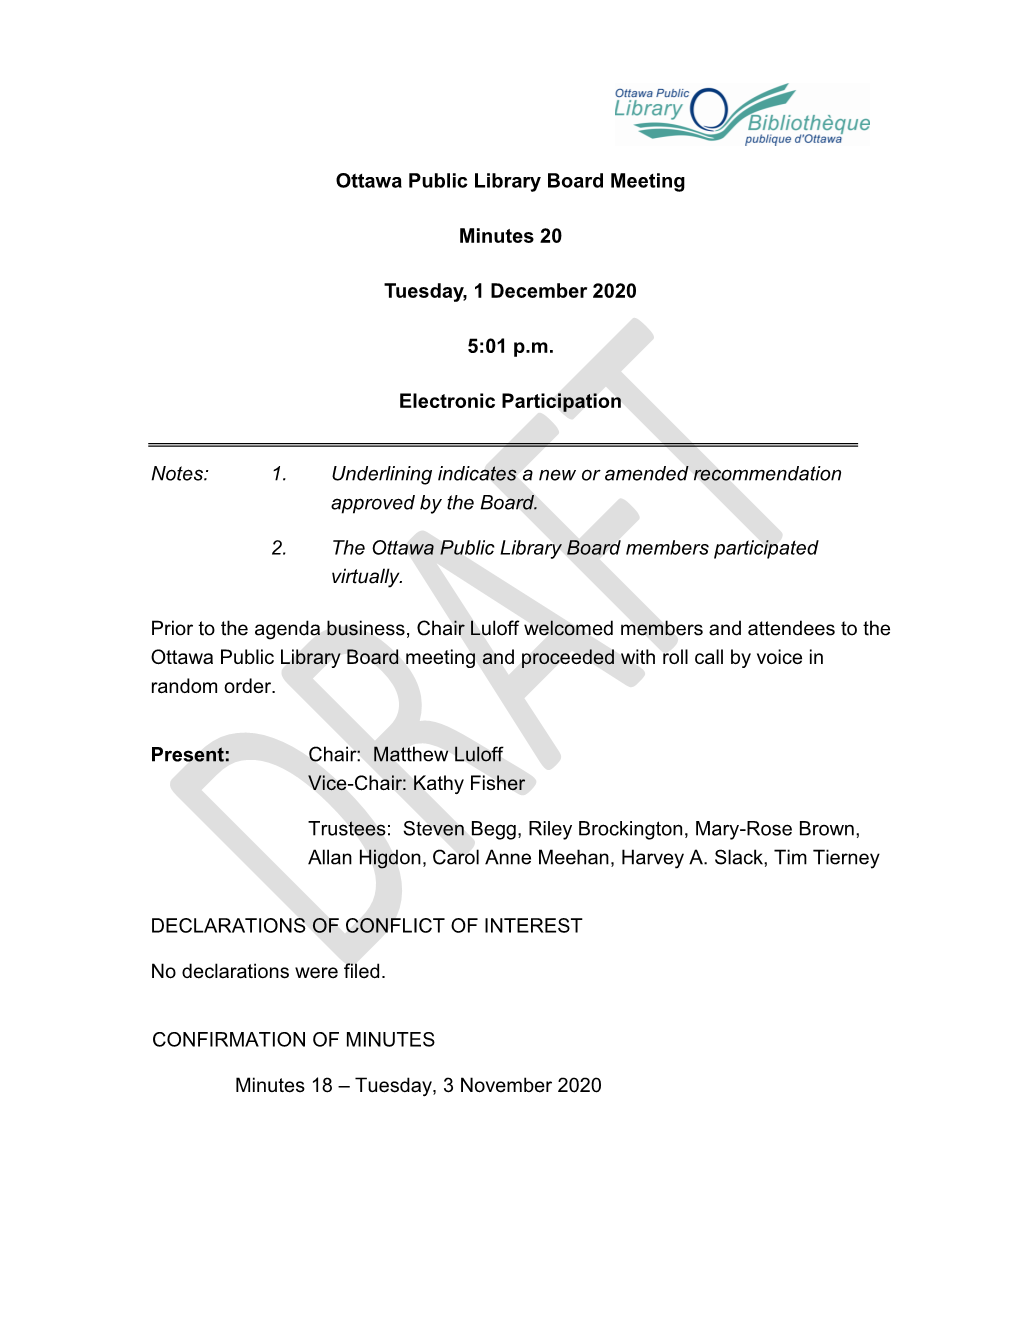 Ottawa Public Library Board Meeting Minutes 20 Tuesday